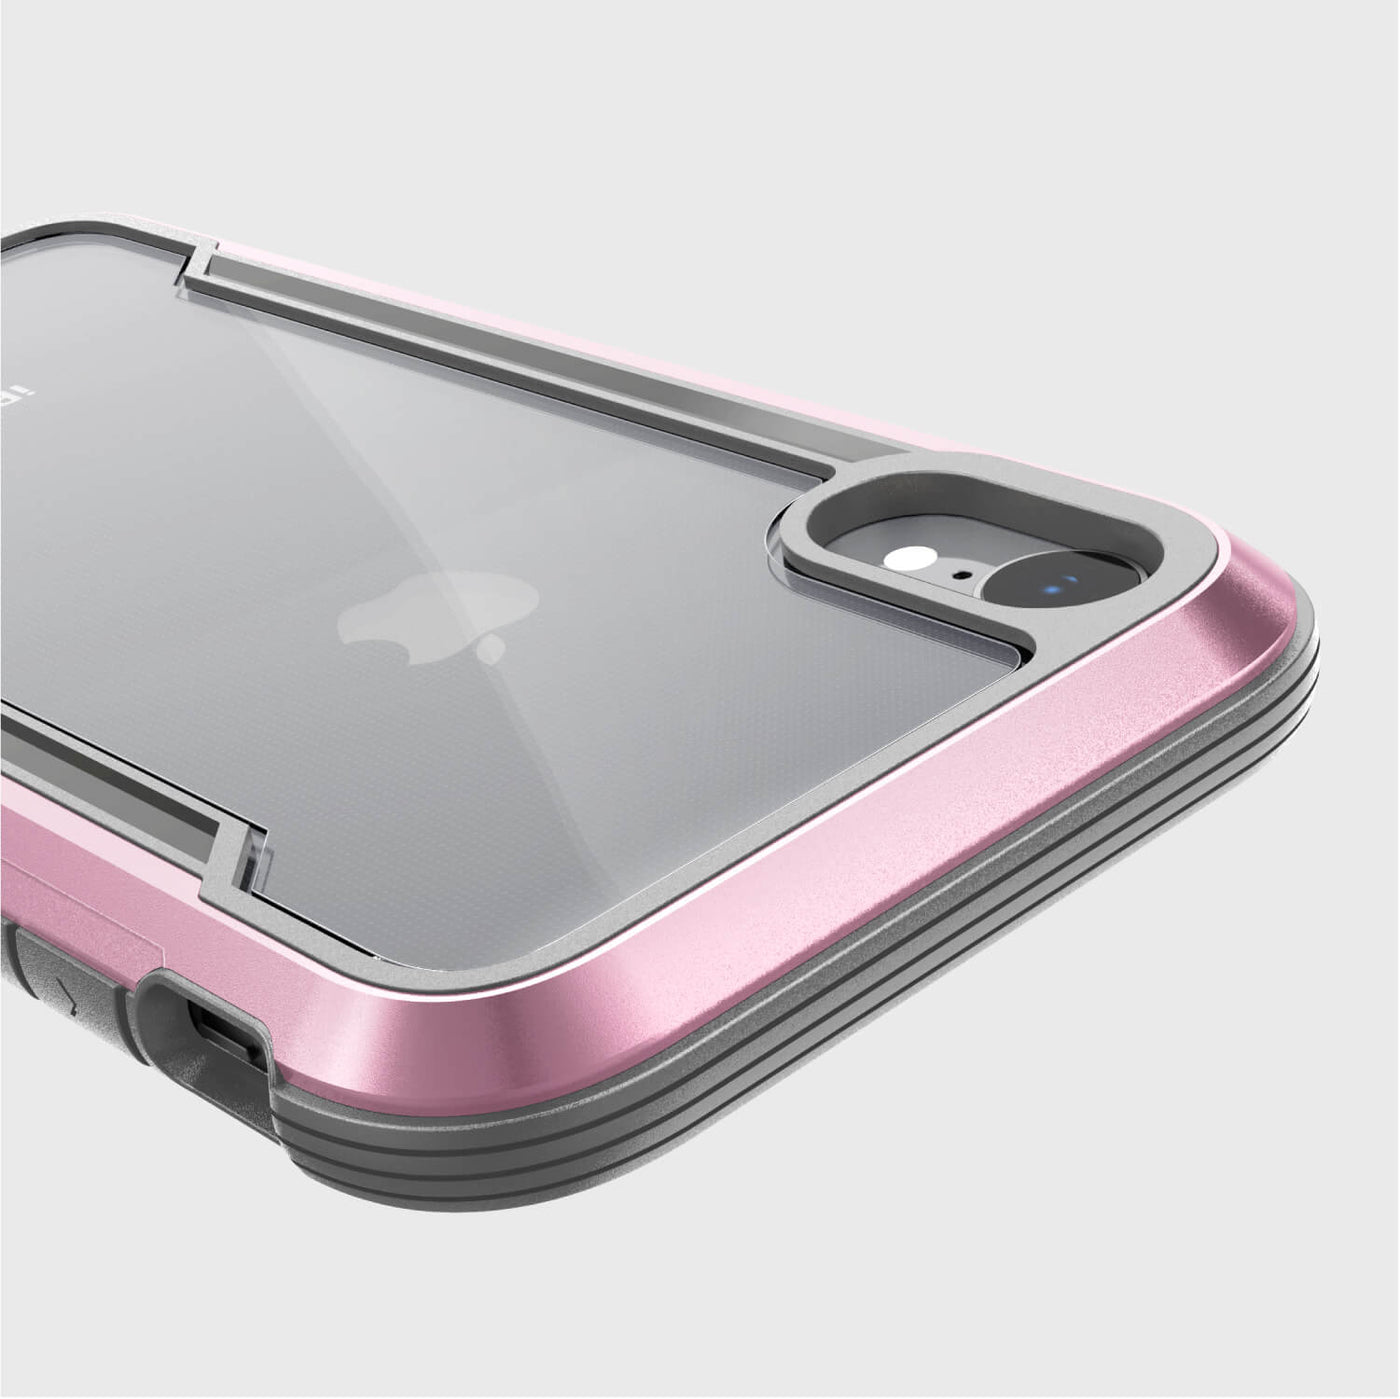 Rugged Case for iPhone XR. Raptic Shield in rose gold.